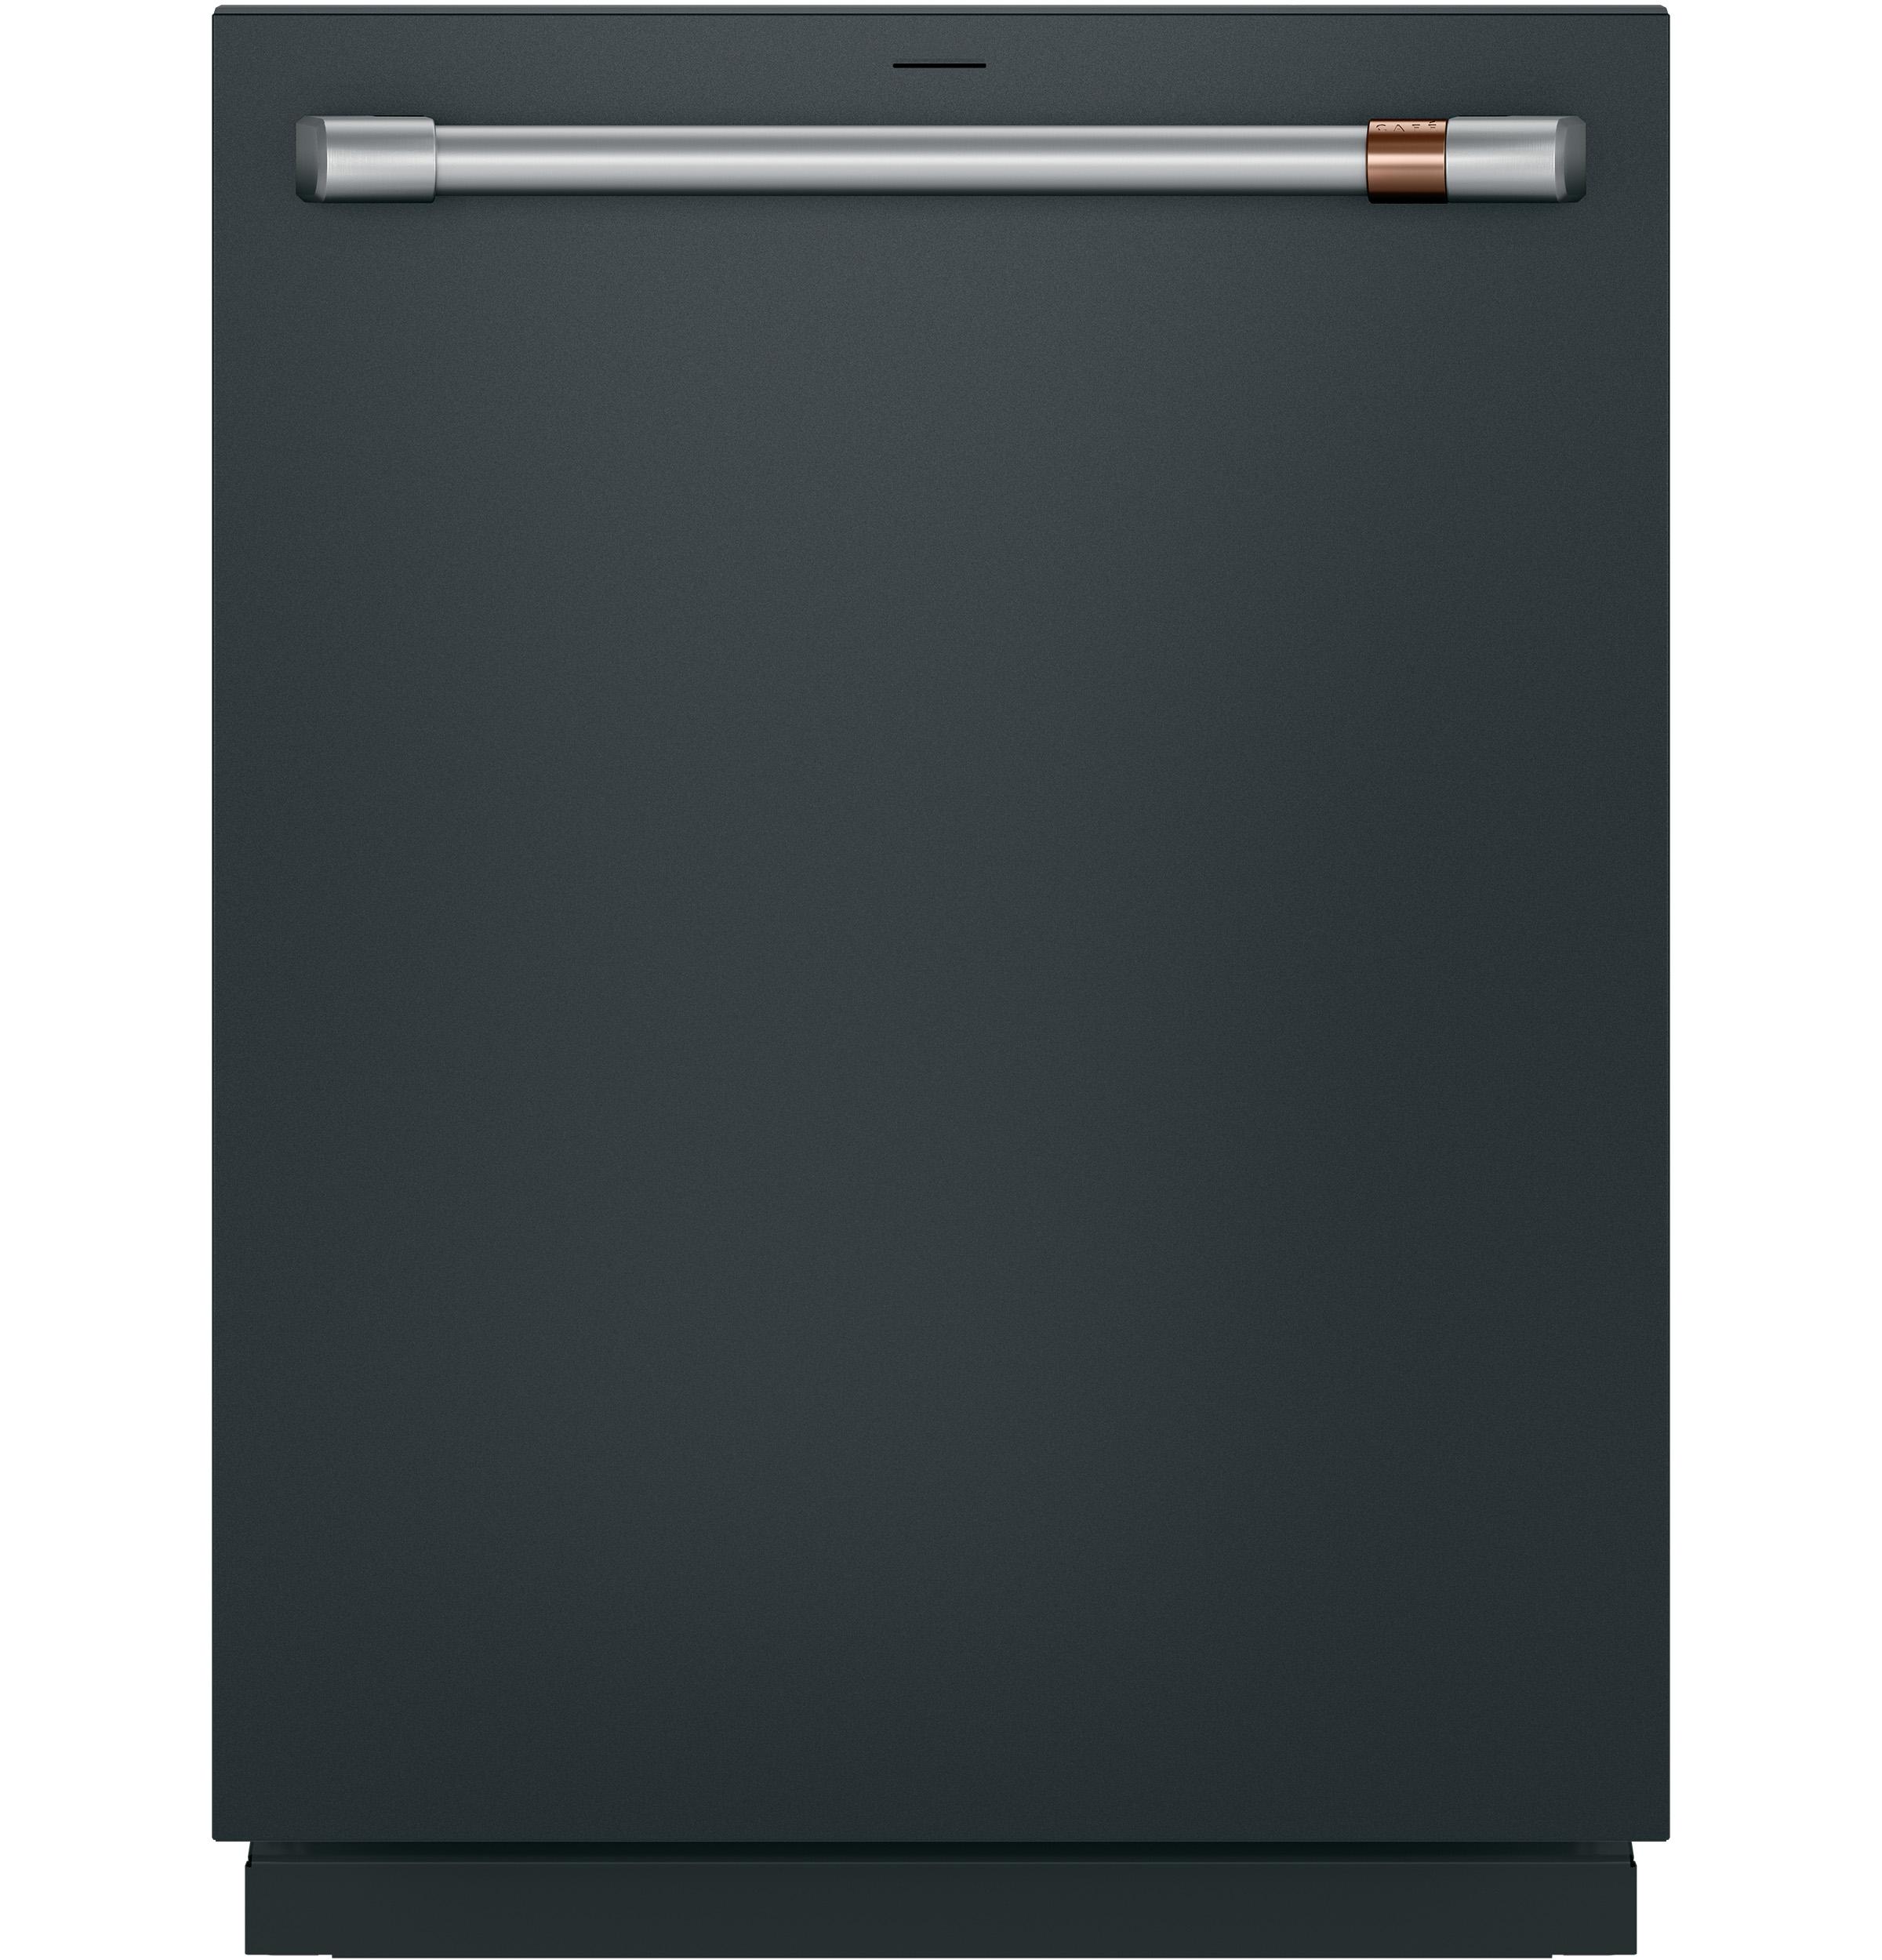 Cafe Caf(eback)™ CustomFit ENERGY STAR Stainless Interior Smart Dishwasher with Ultra Wash Top Rack and Dual Convection Ultra Dry, 44 dBA